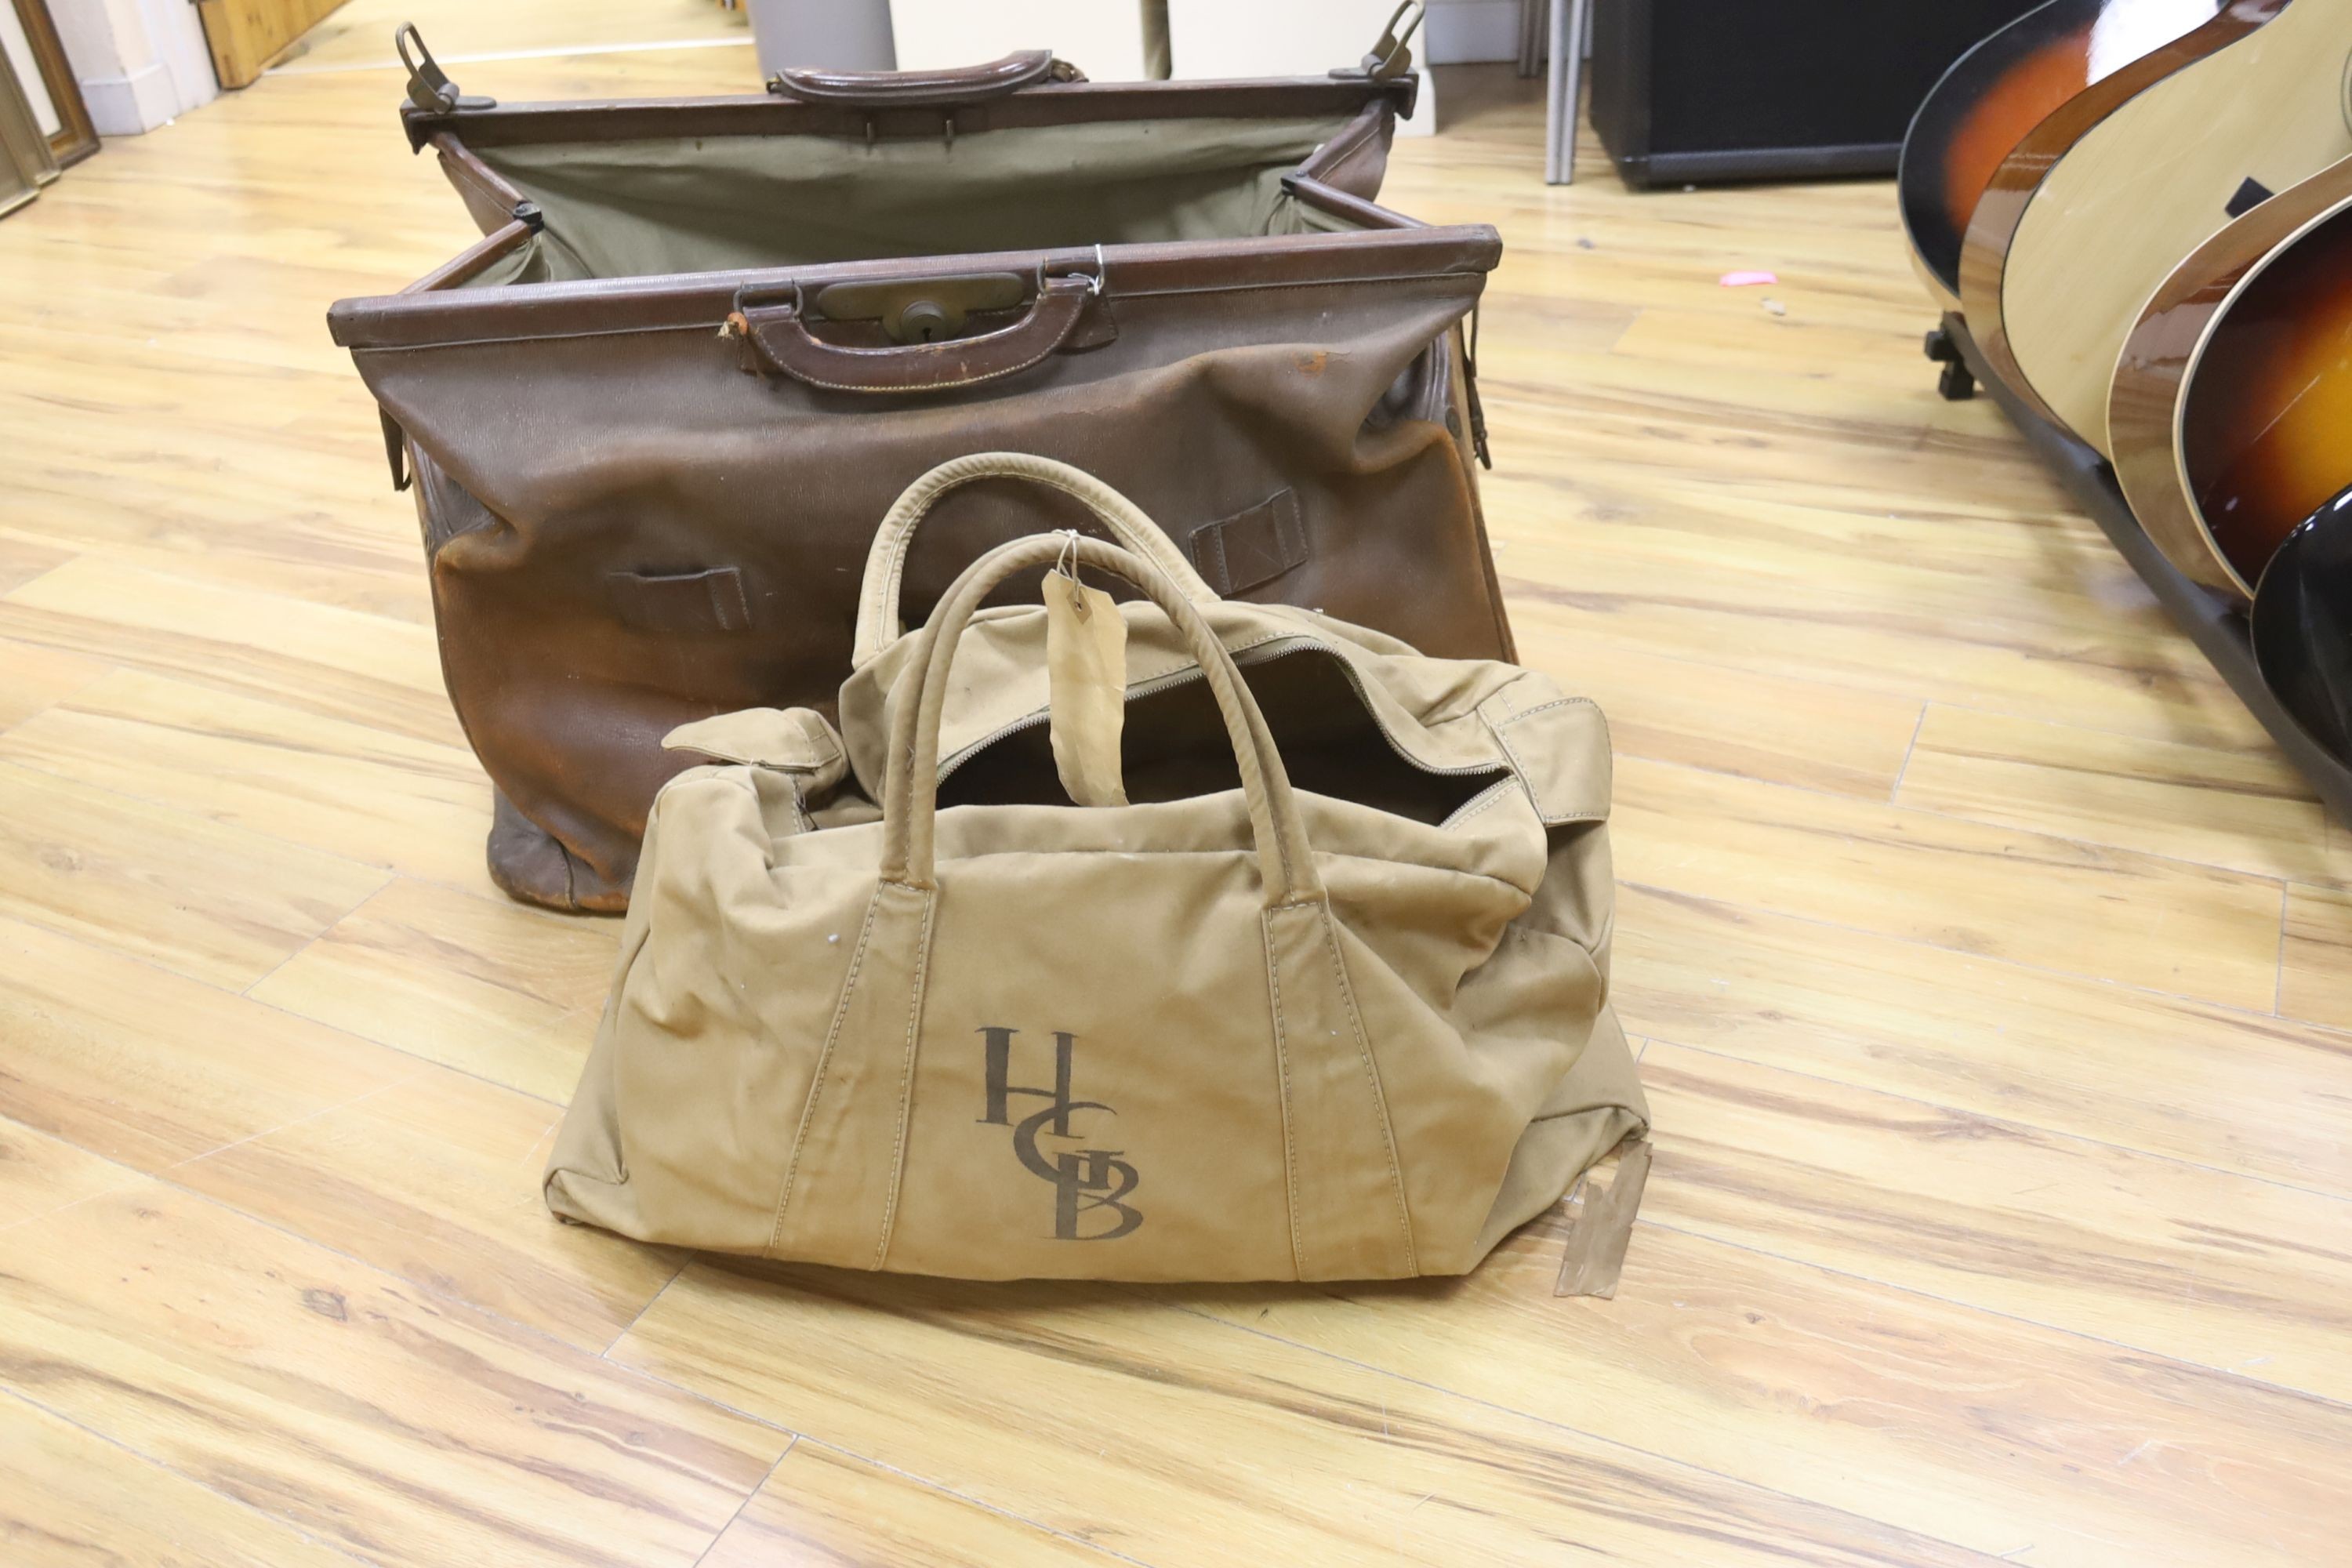 A large Gladstone bag, military canvas contents